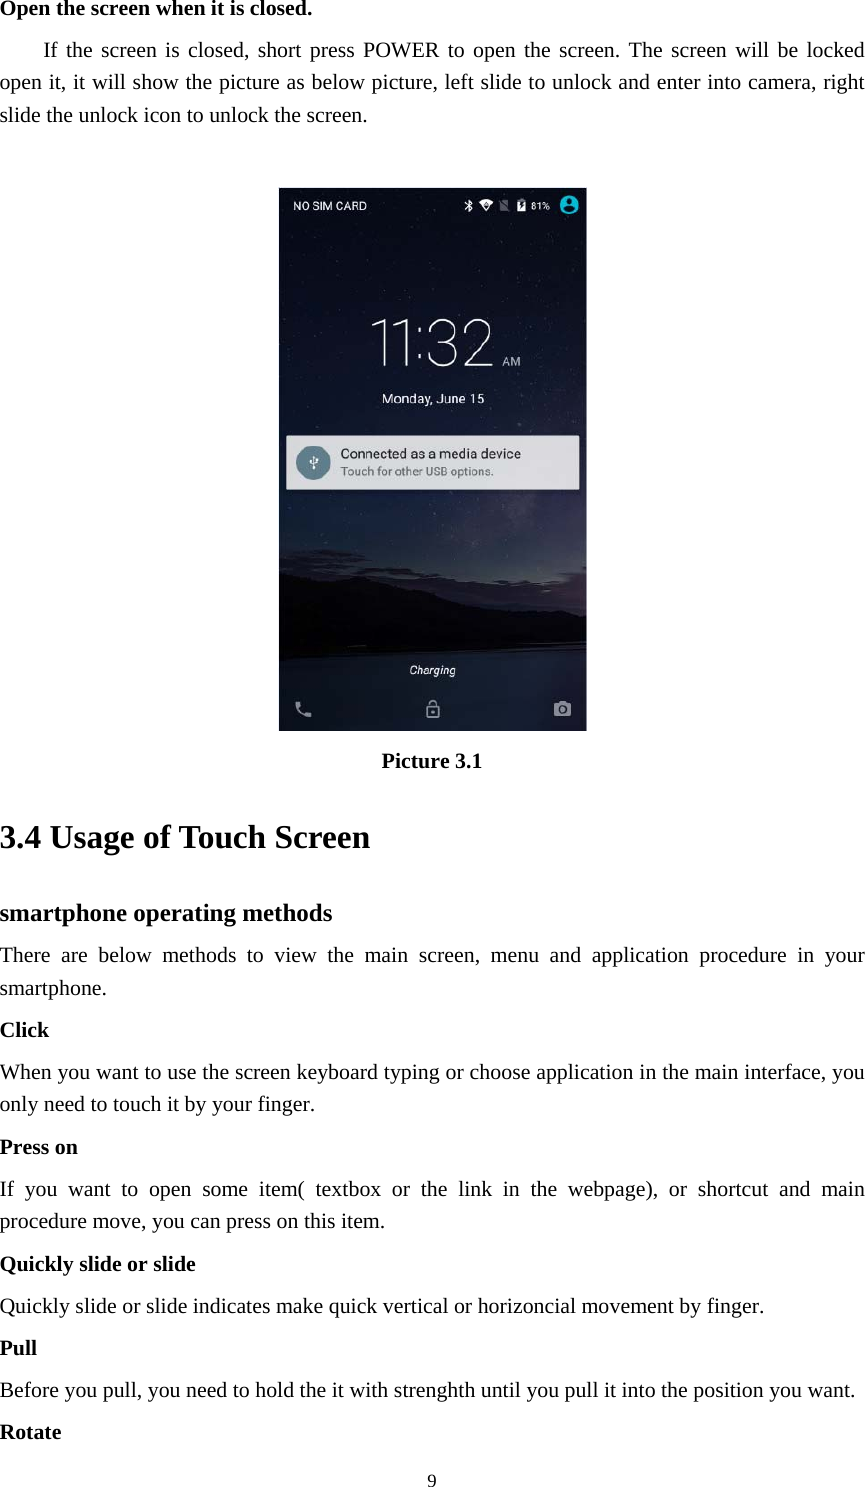     9Open the screen when it is closed. If the screen is closed, short press POWER to open the screen. The screen will be locked open it, it will show the picture as below picture, left slide to unlock and enter into camera, right slide the unlock icon to unlock the screen.   Picture 3.1 3.4 Usage of Touch Screen smartphone operating methods There are below methods to view the main screen, menu and application procedure in your smartphone. Click  When you want to use the screen keyboard typing or choose application in the main interface, you only need to touch it by your finger. Press on If you want to open some item( textbox or the link in the webpage), or shortcut and main procedure move, you can press on this item. Quickly slide or slide Quickly slide or slide indicates make quick vertical or horizoncial movement by finger.   Pull  Before you pull, you need to hold the it with strenghth until you pull it into the position you want. Rotate 